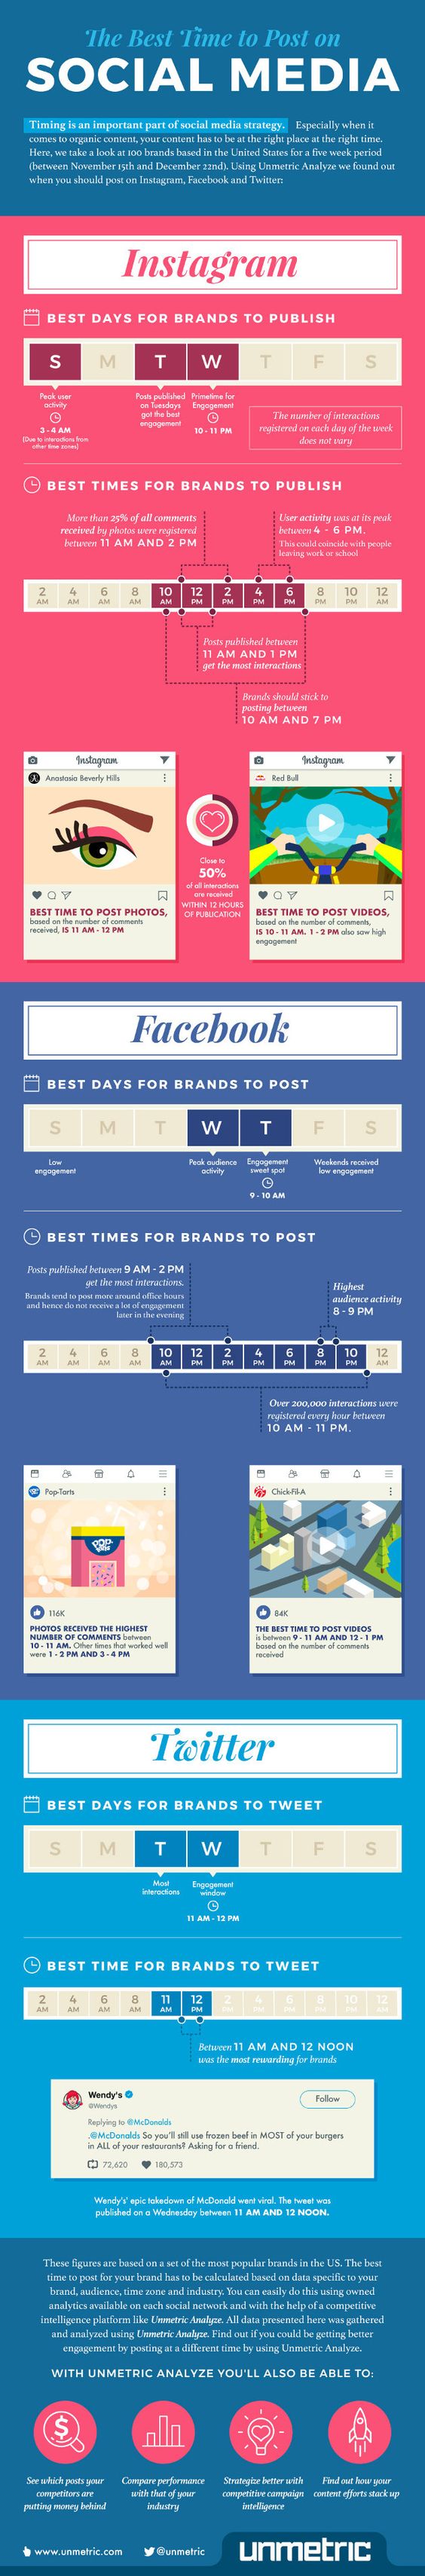 Audience on Social Media- The Best Days and Times to Post on Social Media